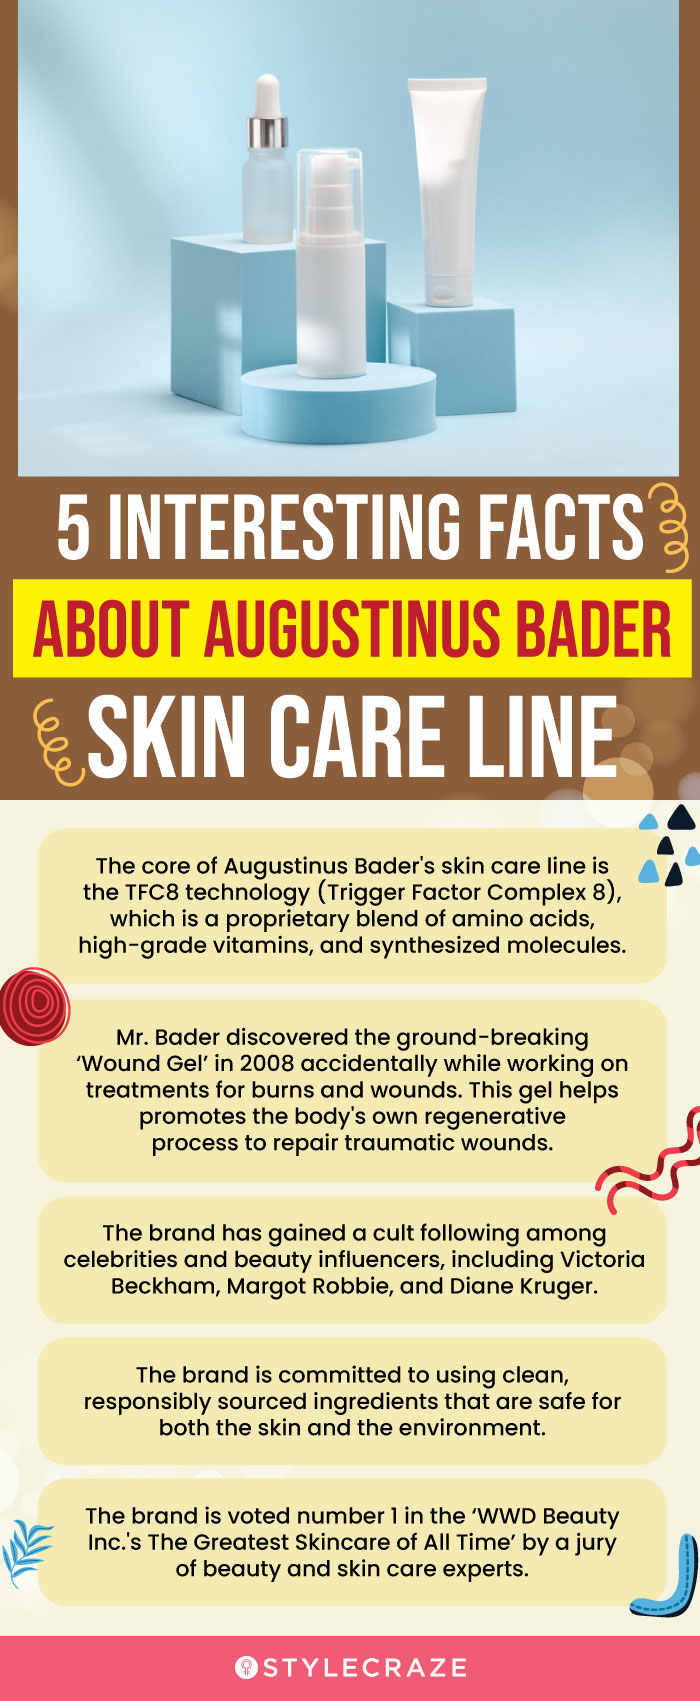 5 Interesting Facts About Augustinus Bader Skin Care Line (infographic)